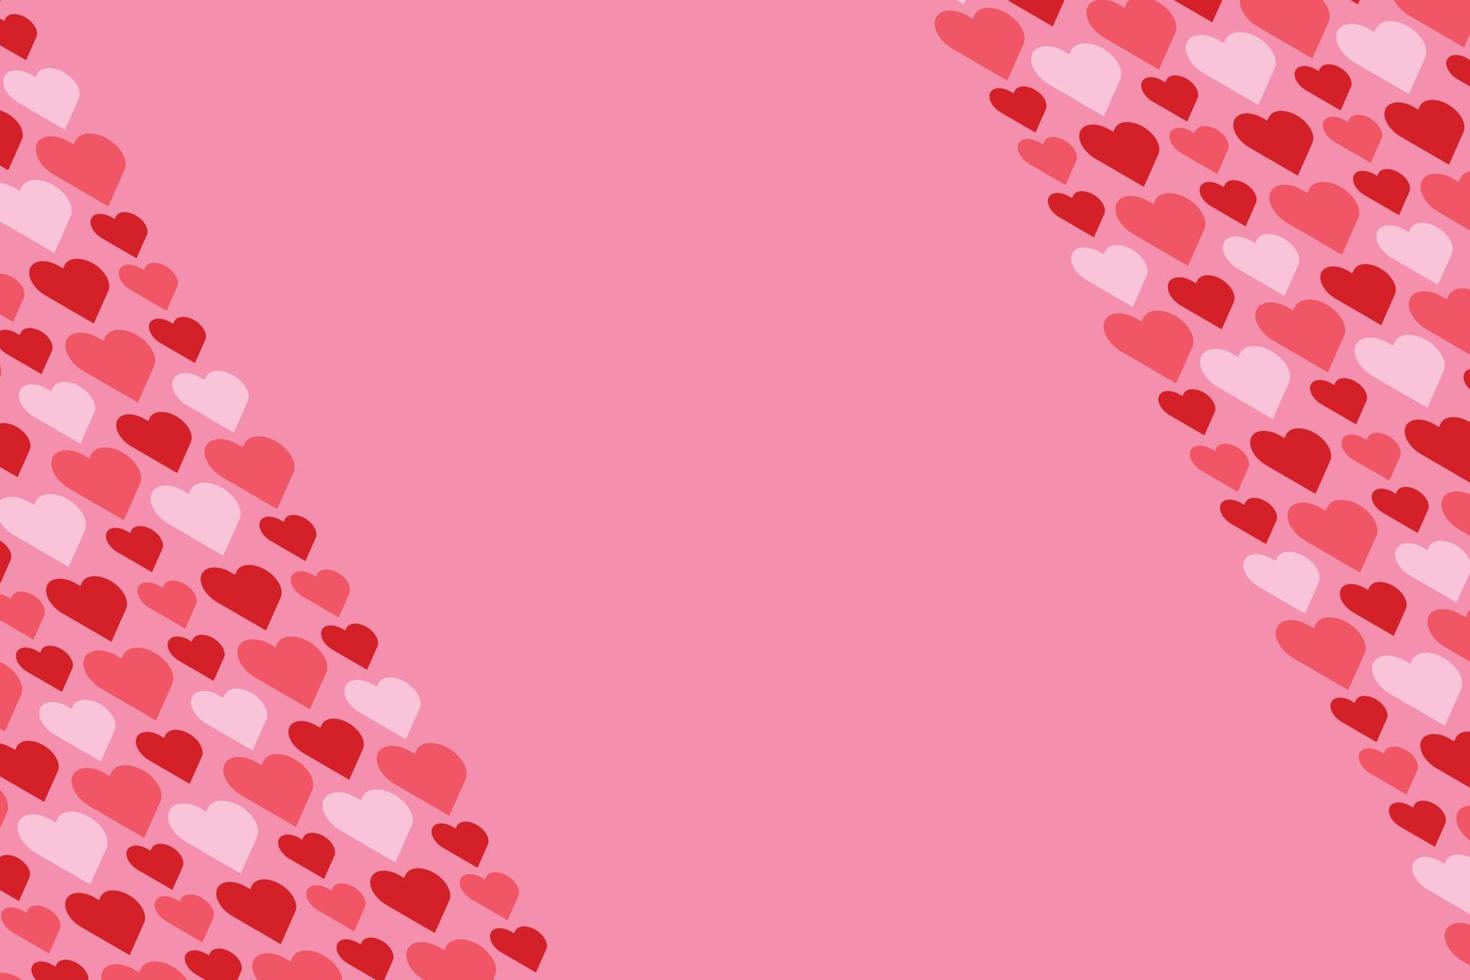 Lovely background with pink hearts on a pink background vector